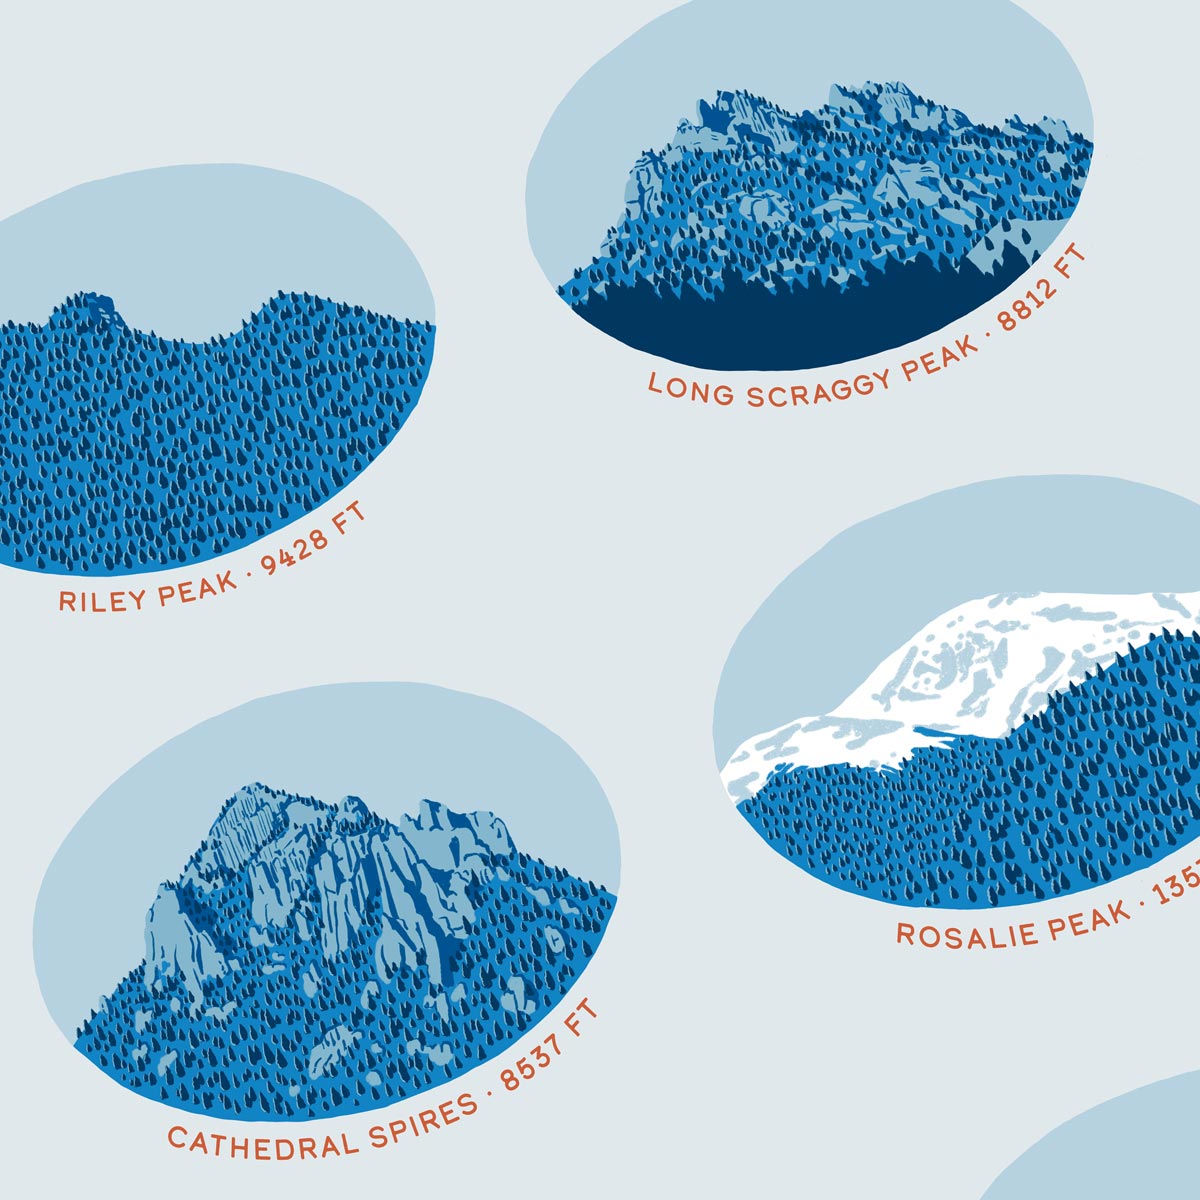 A close-up view of four mountain illustrations drawn in blue with elevations written underneath